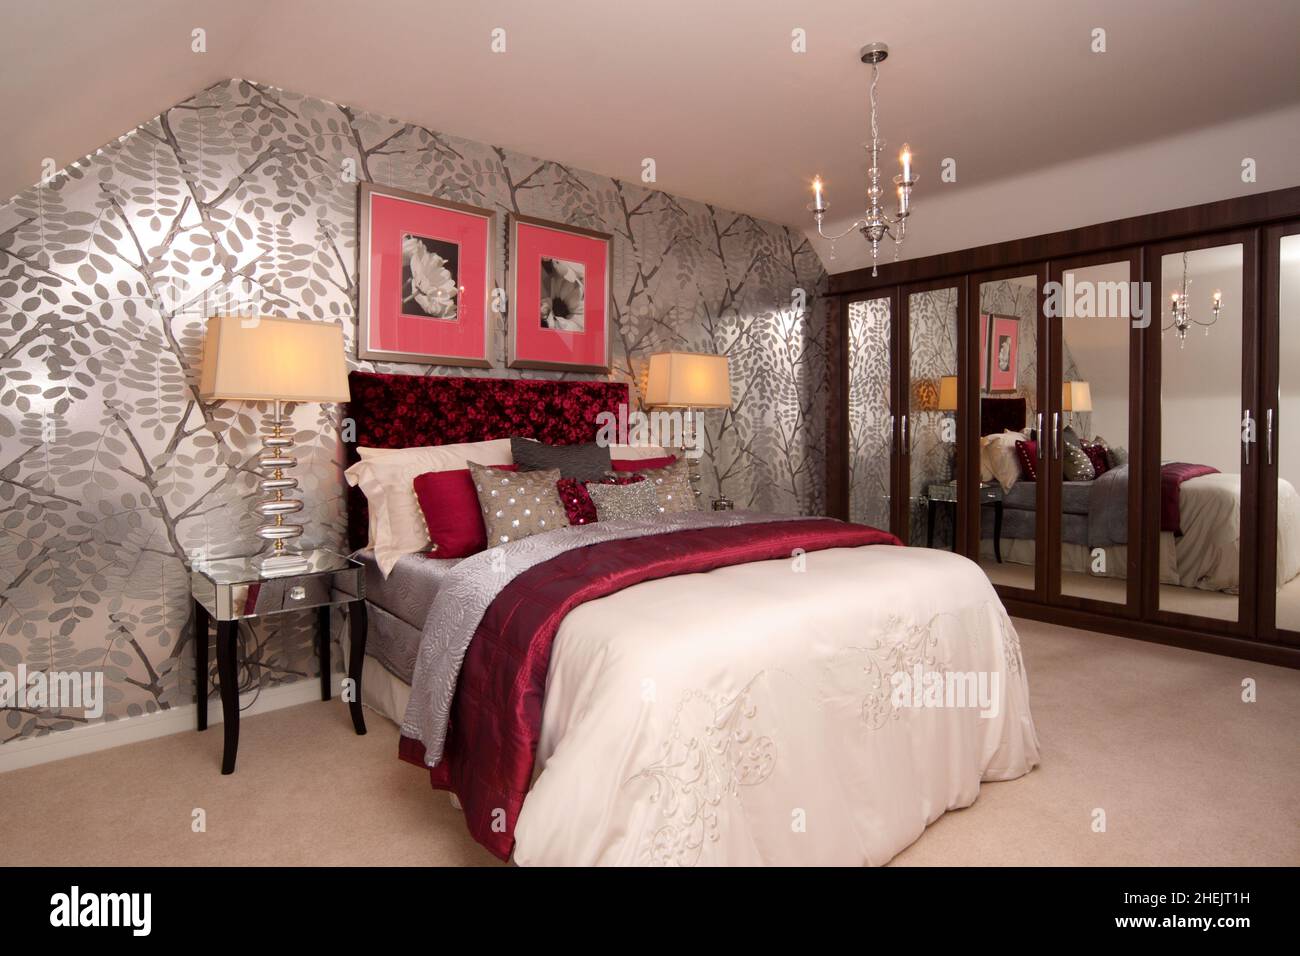 Double kingsize bed in bedroom of modern house, loft conversion,cream red silver theme,silver wallpaper,feature wall,bedside lights, fitted wardrobes, Stock Photo